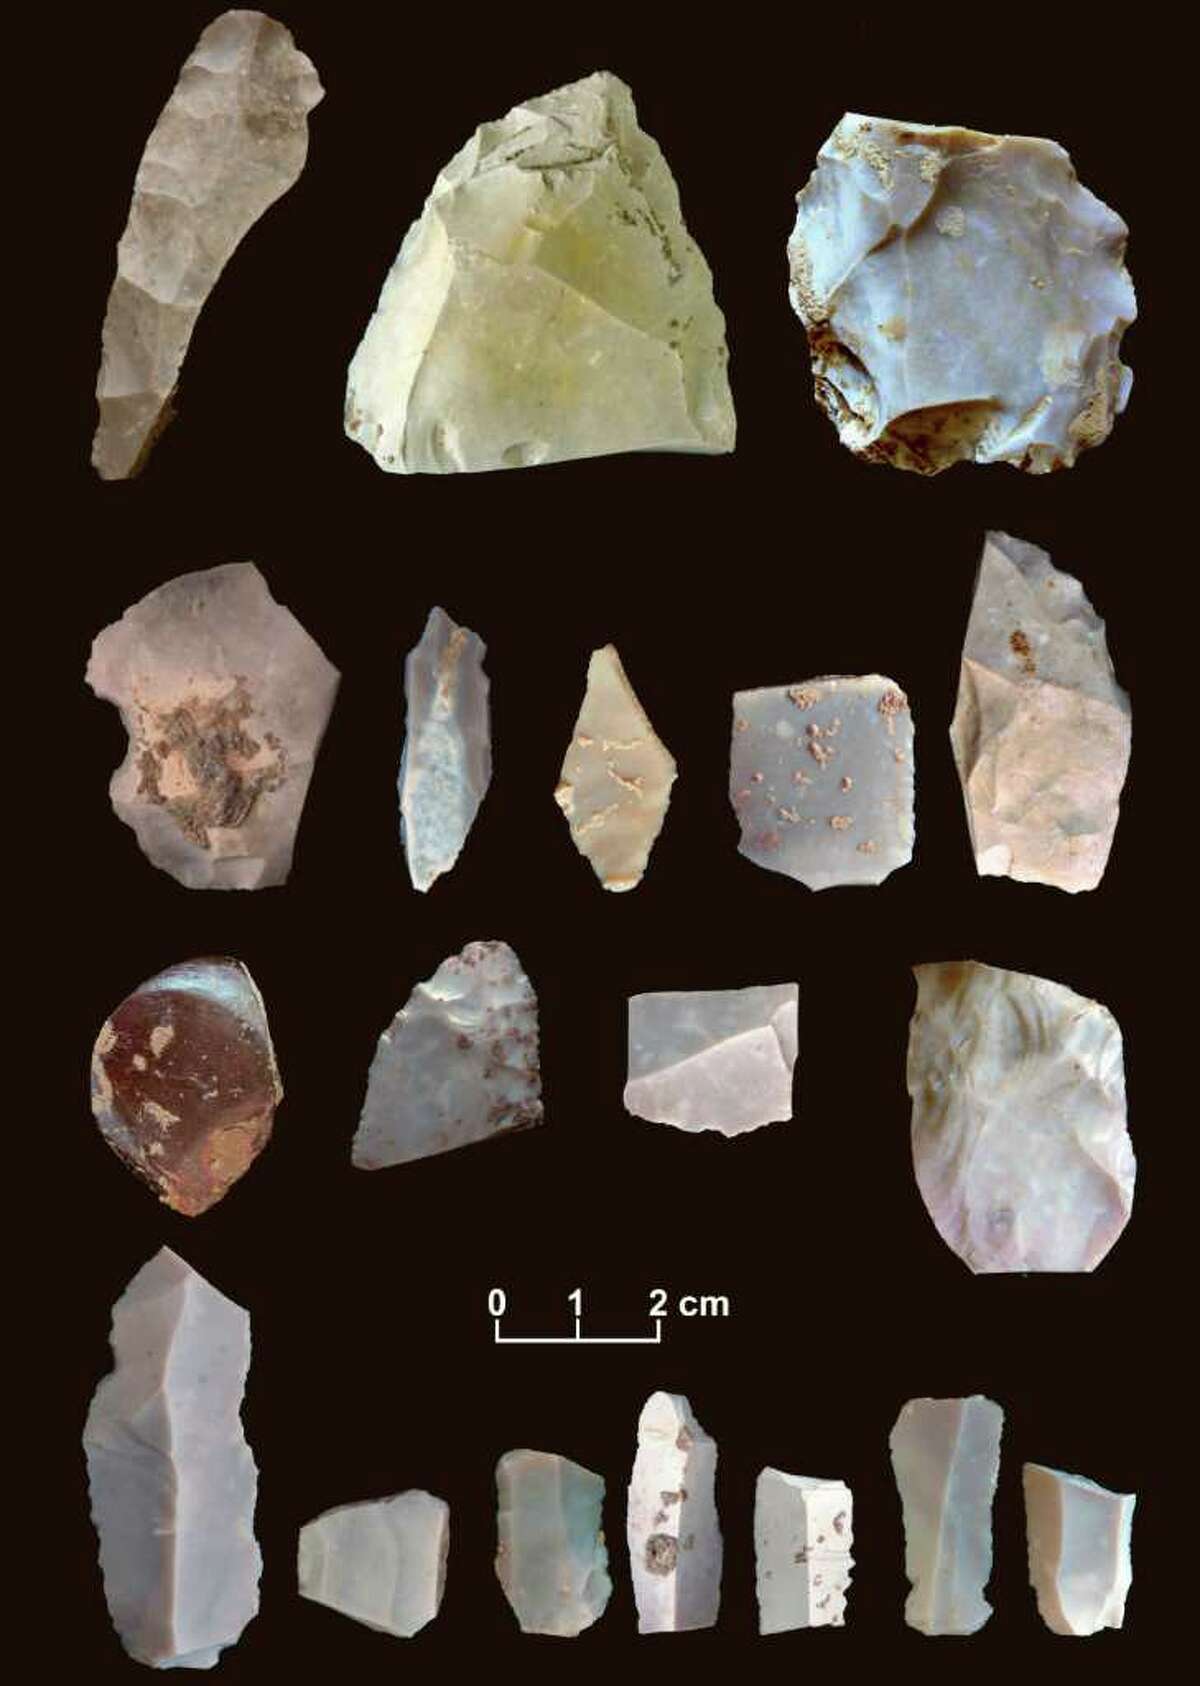 Artifacts from the 15,500-year-old site in Texas.